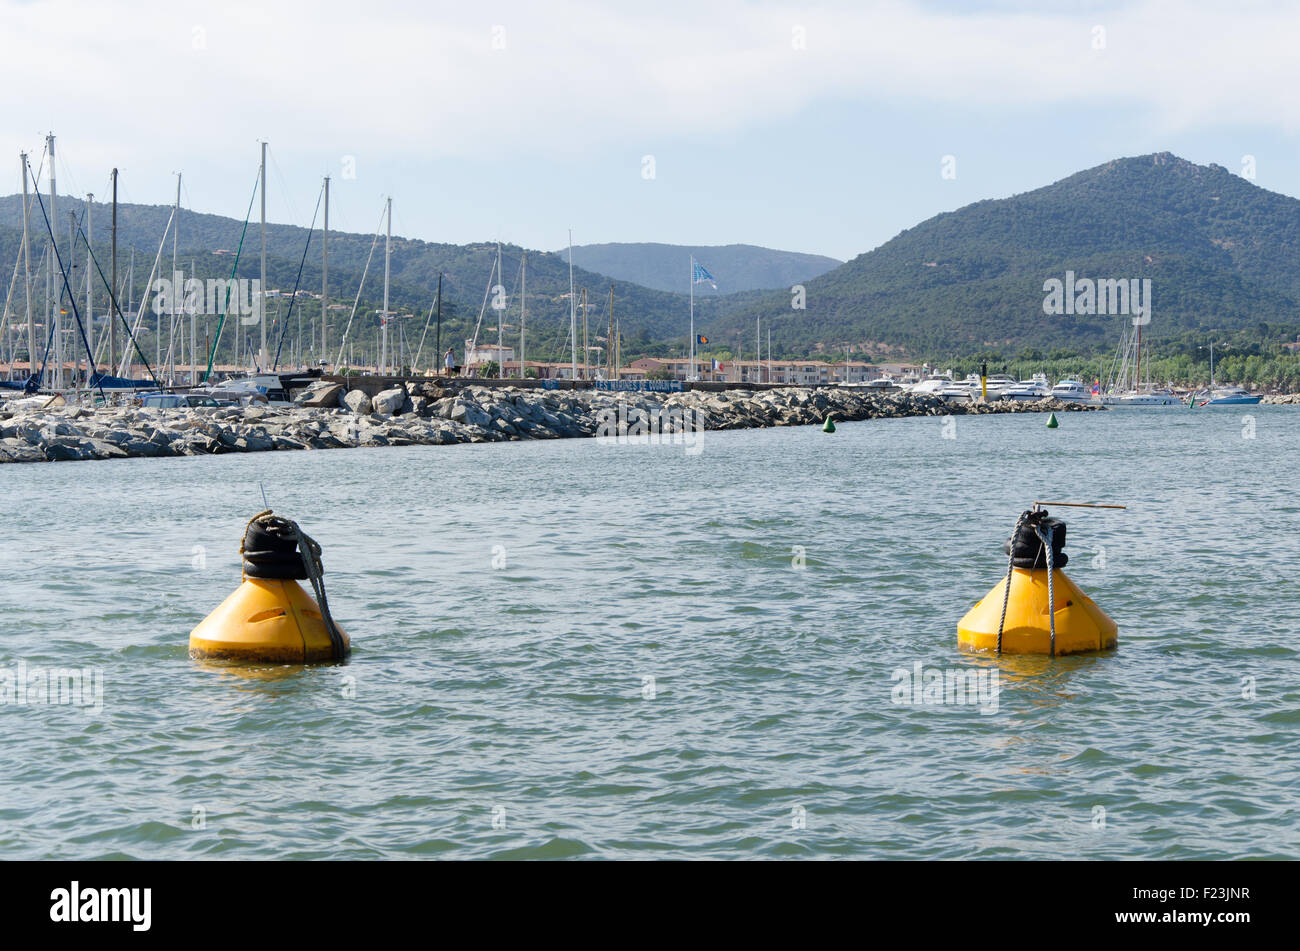 Two yellow buoys floating on a sea Stock Photo